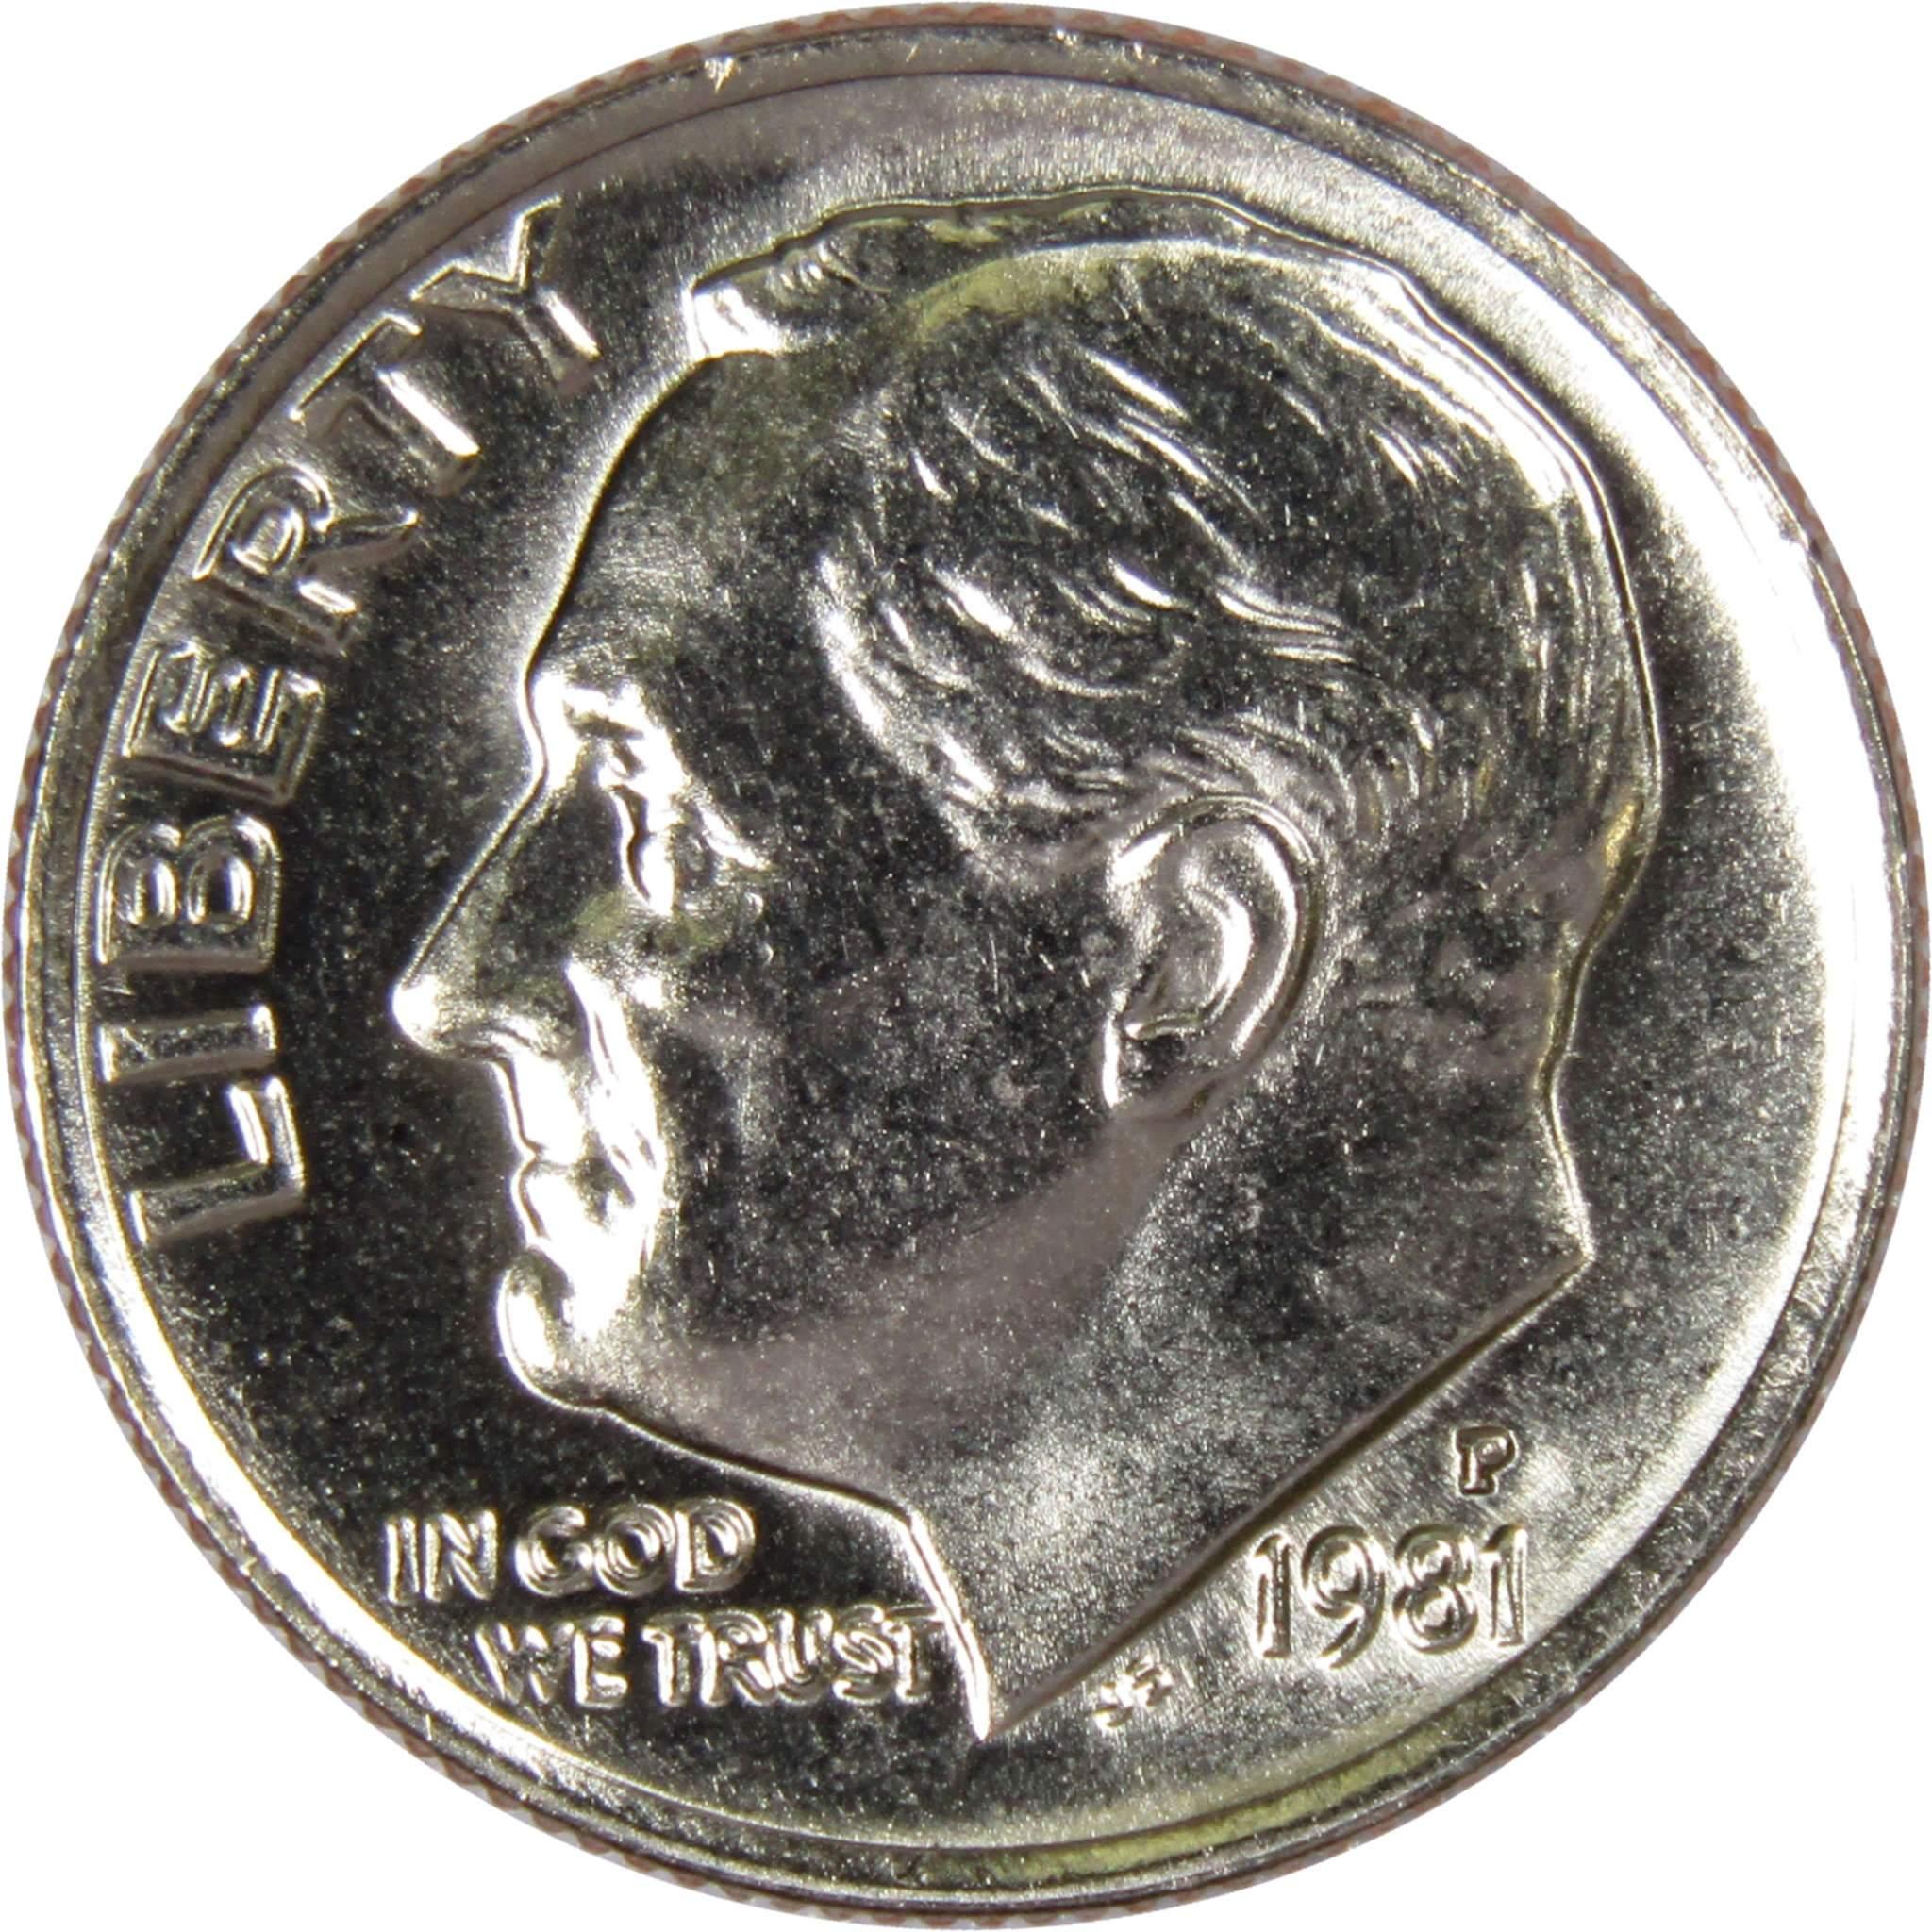 1981 P Roosevelt Dime BU Uncirculated Mint State 10c US Coin Collectible